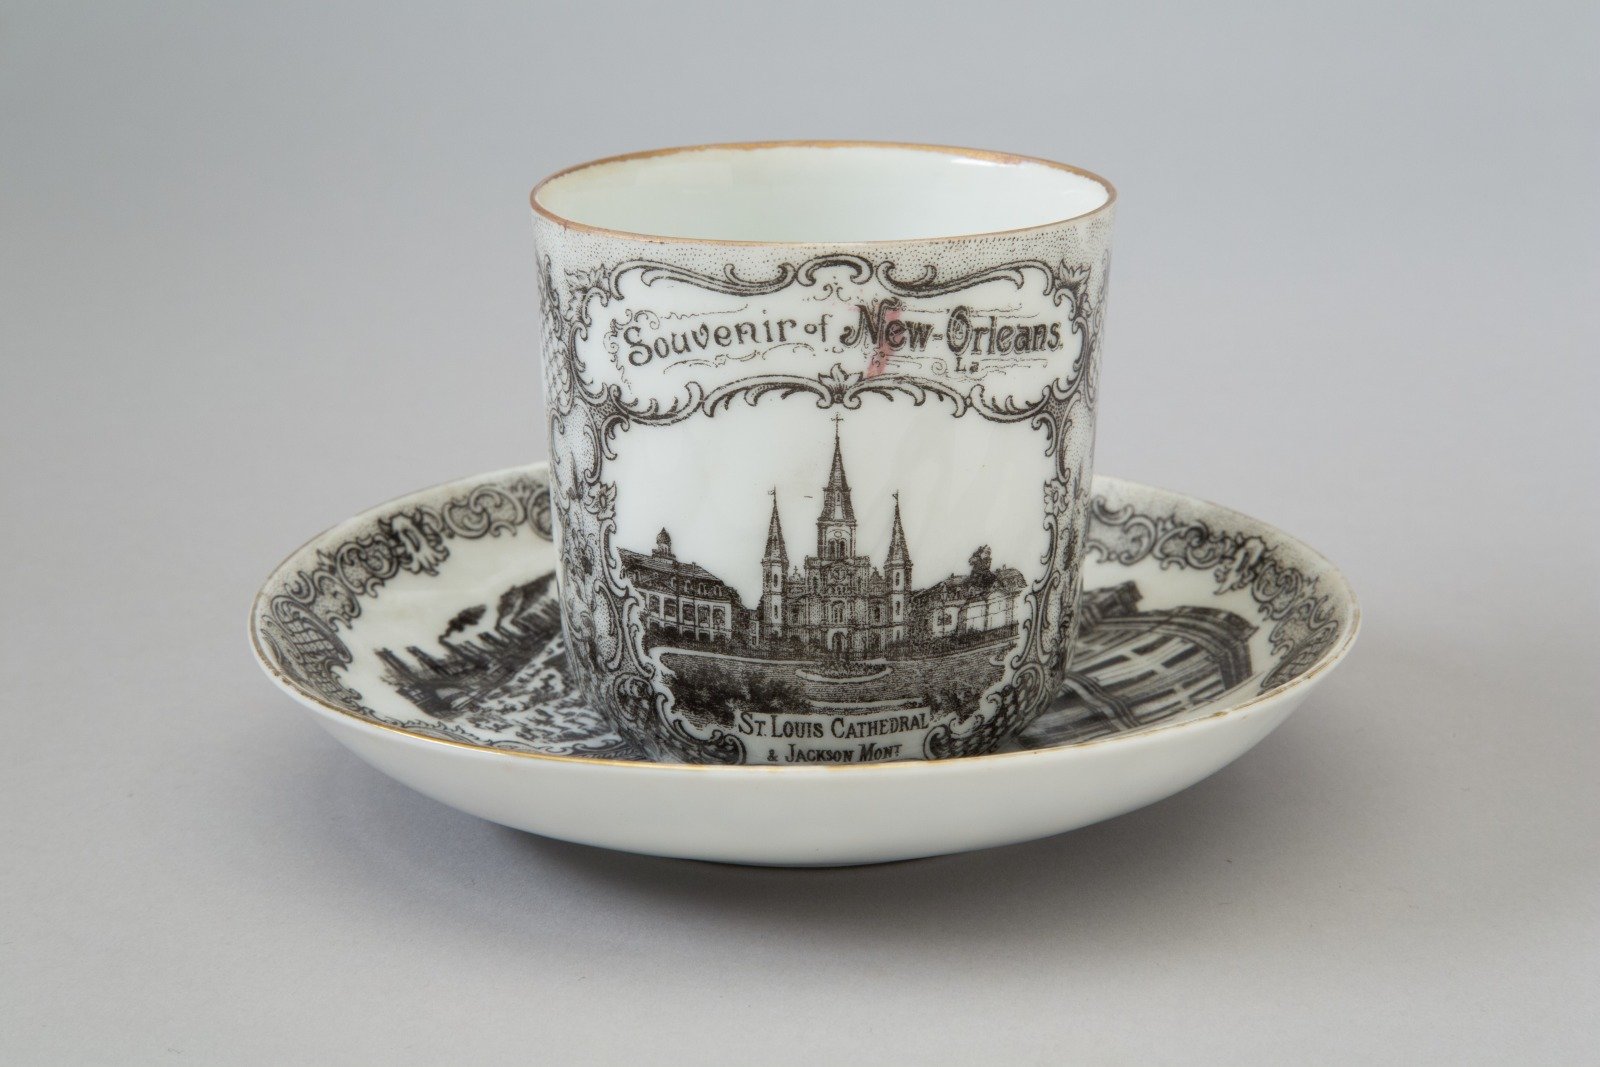   “Souvenir of New-Orleans” cup and saucer  ca. 1910; transfer-printed porcelain manufactured by Victoria Schmidt &amp; Co. (Czechoslovakia)  The Historic New Orleans Collection, gift of Mr. Harold Schilke, 1965.19ab  